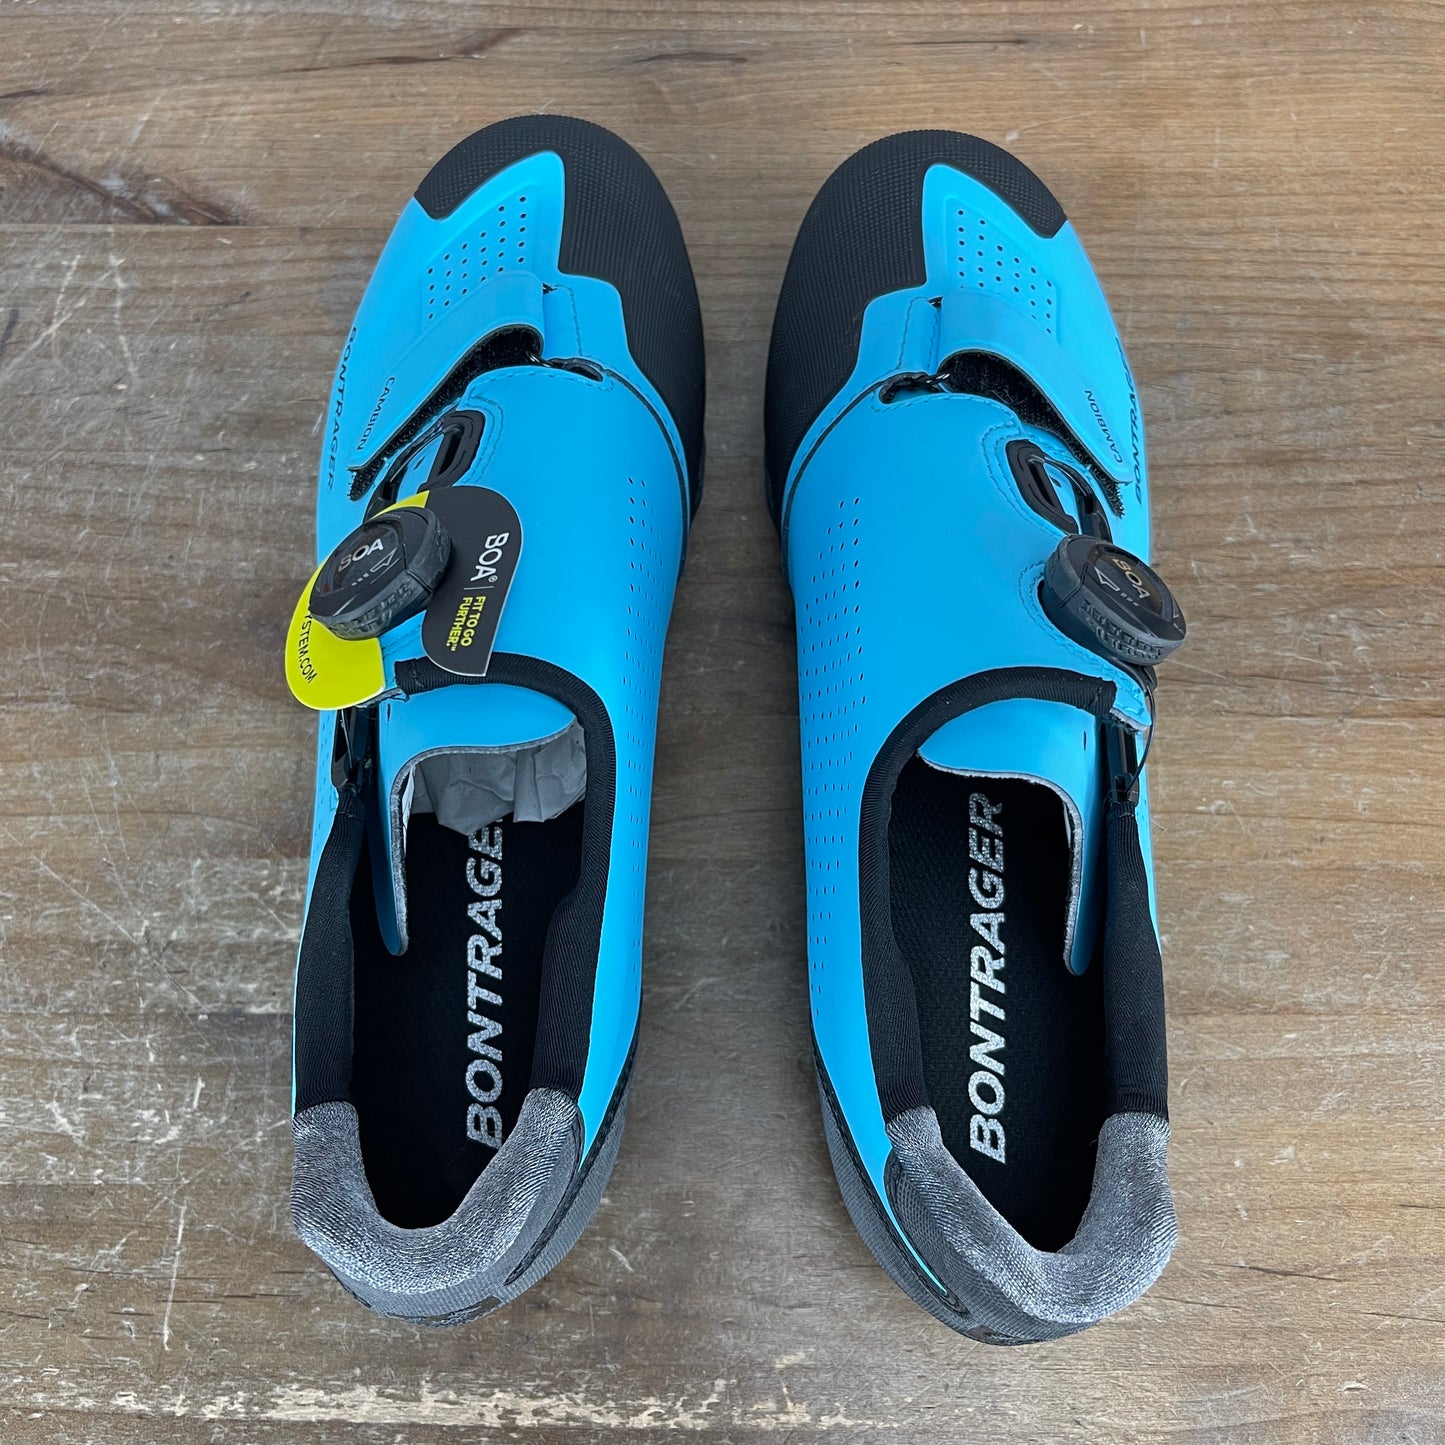 New! Bontrager Cambion MTB Gravel Size EU 41 US 8 Cycling Shoes Blue